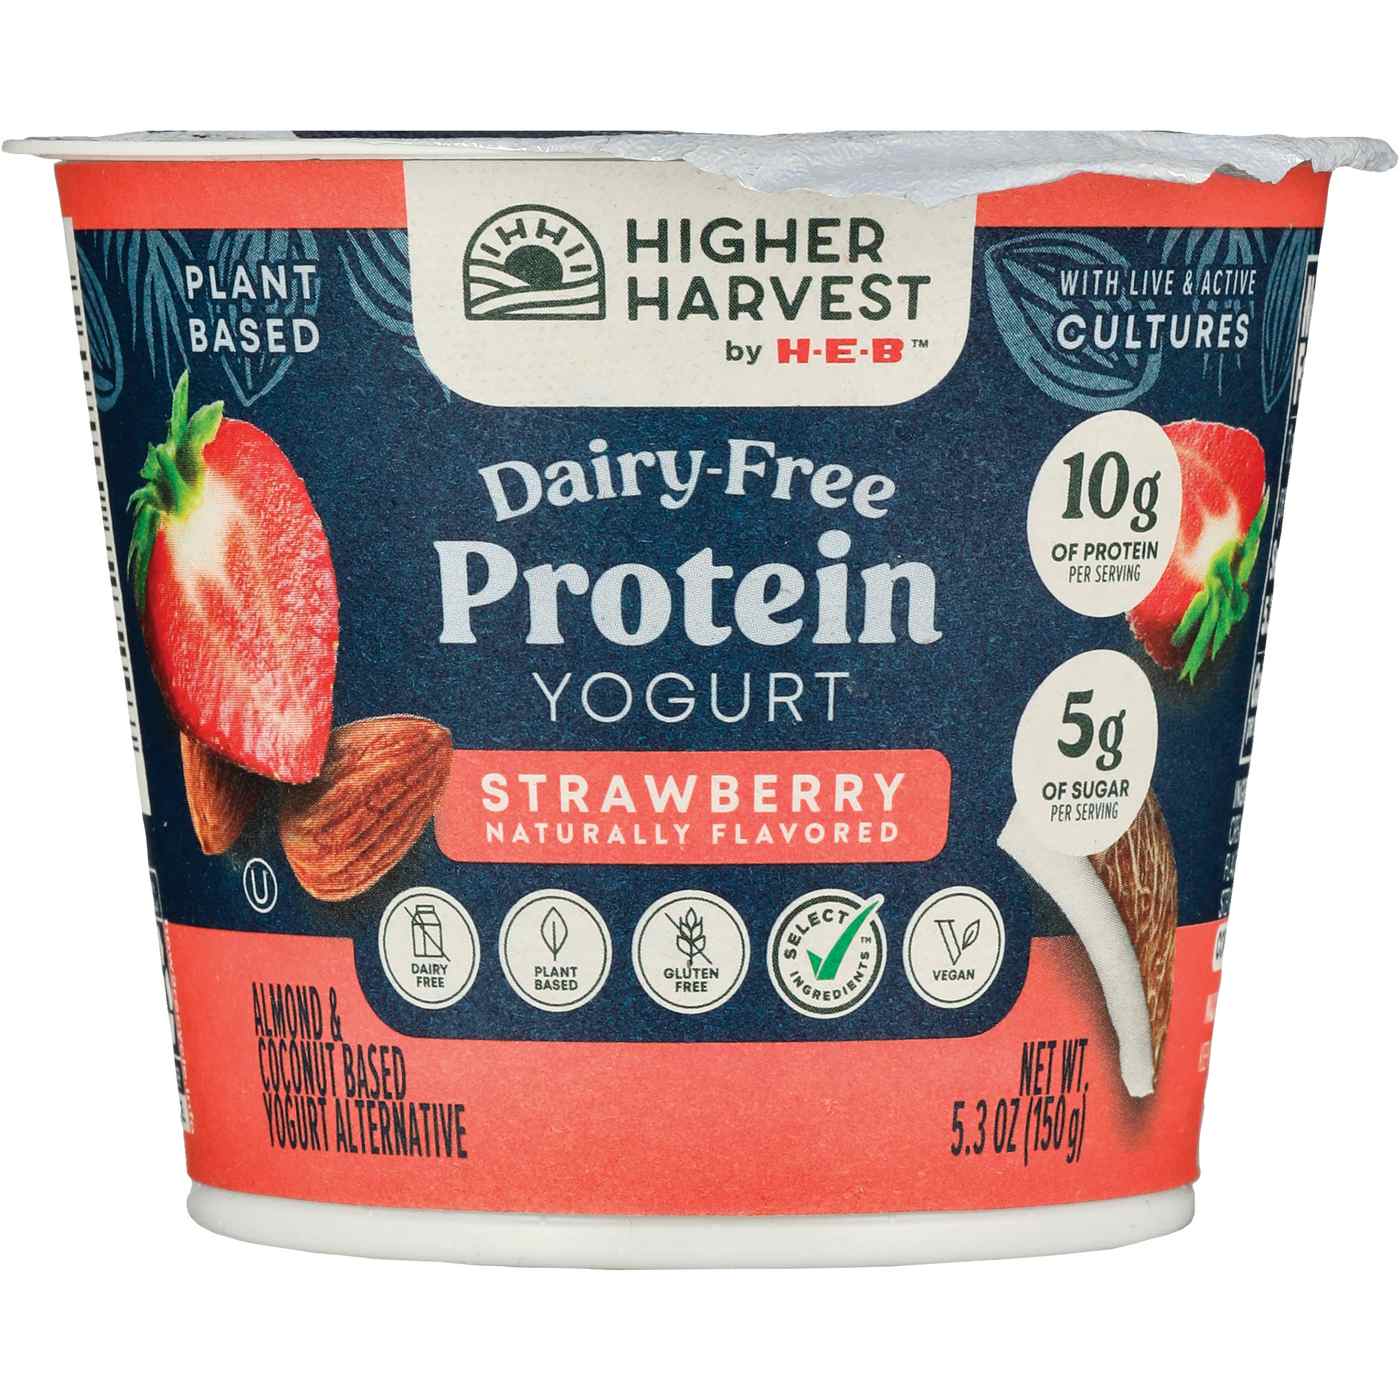 Higher Harvest by H-E-B Dairy Free Protein Yogurt – Strawberry; image 1 of 3